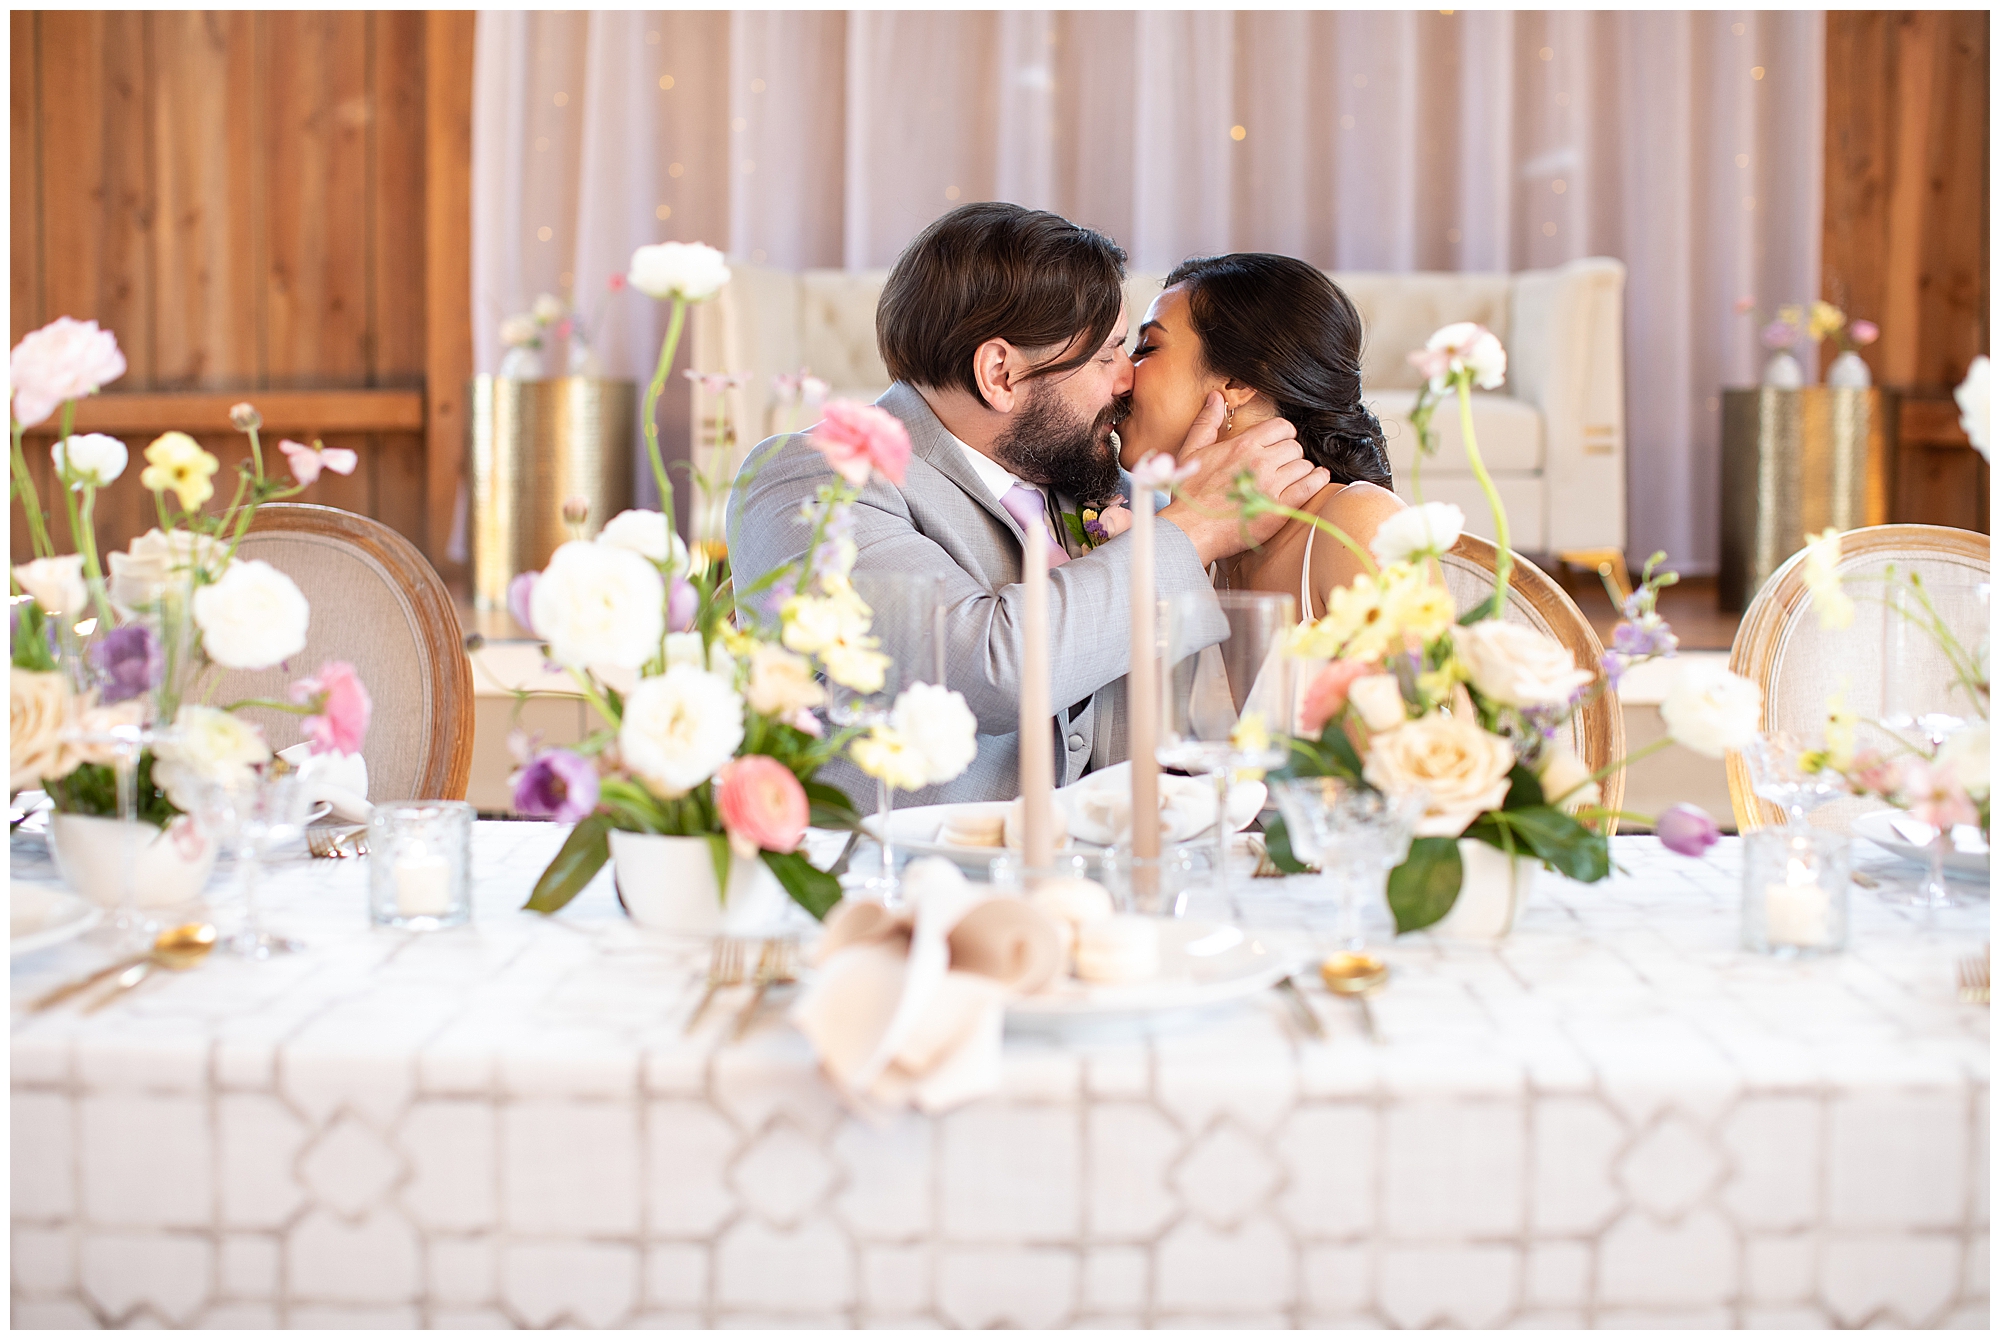 first kiss shot at wedding head table, spring florals on linen table cloth